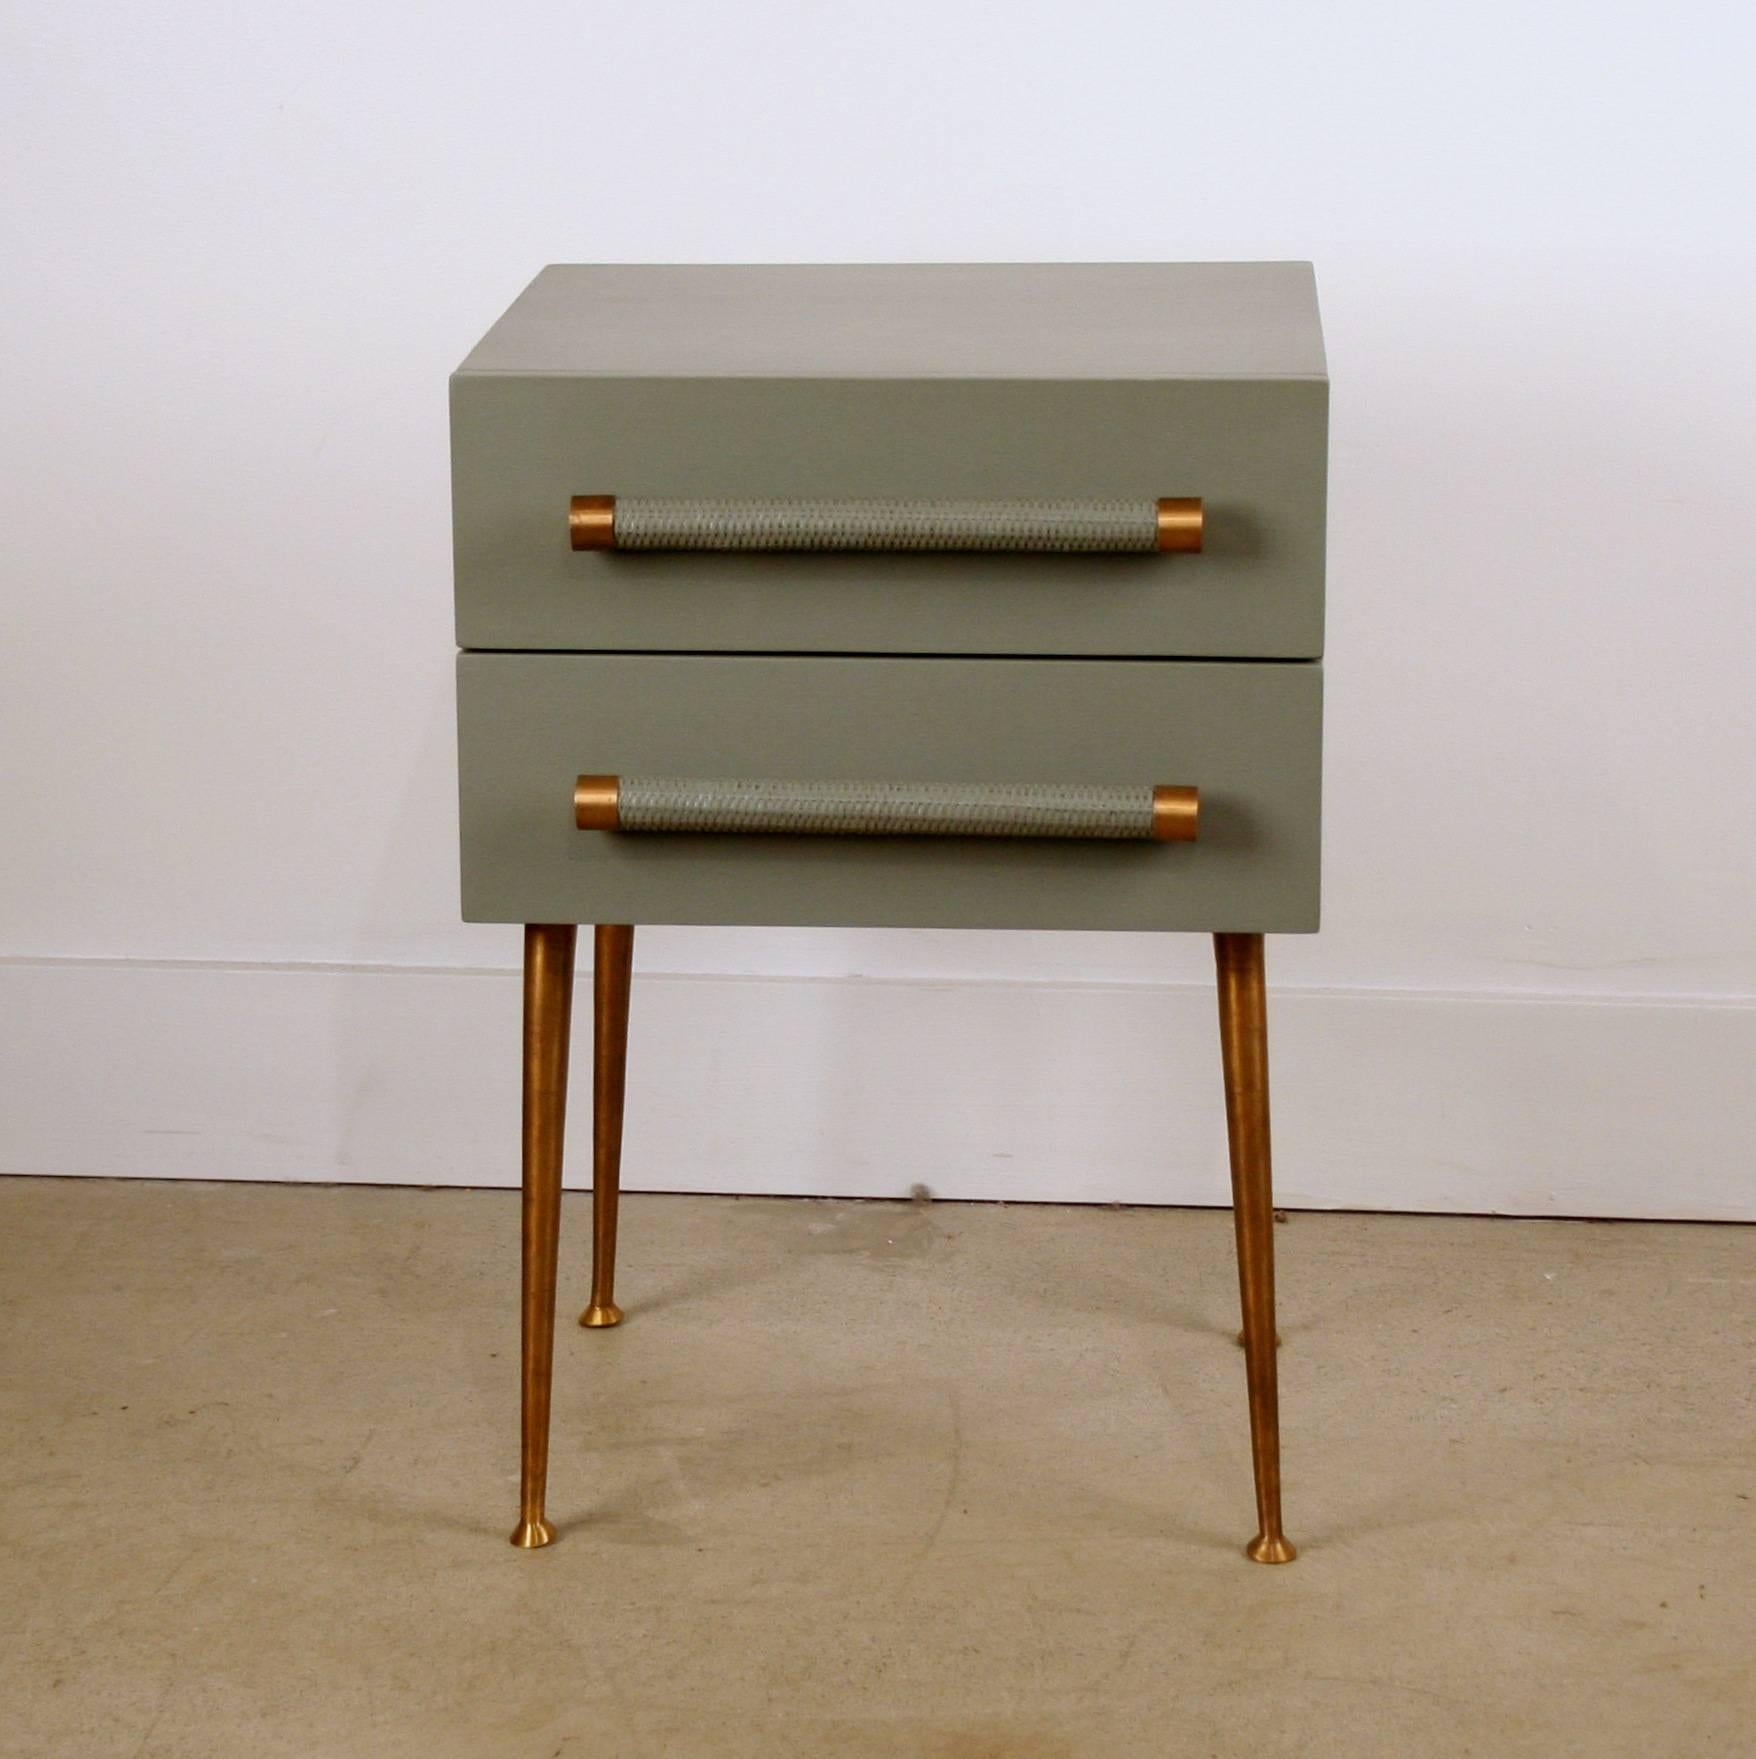 This small two-drawer bedside table features one drawer with a wicker handle, brass trim and is set on four brass legs. Inspiration for this piece comes from the 1950s designer Robsjohn-Gibbings. Handmade and hand-painted solid FSC-certified teak